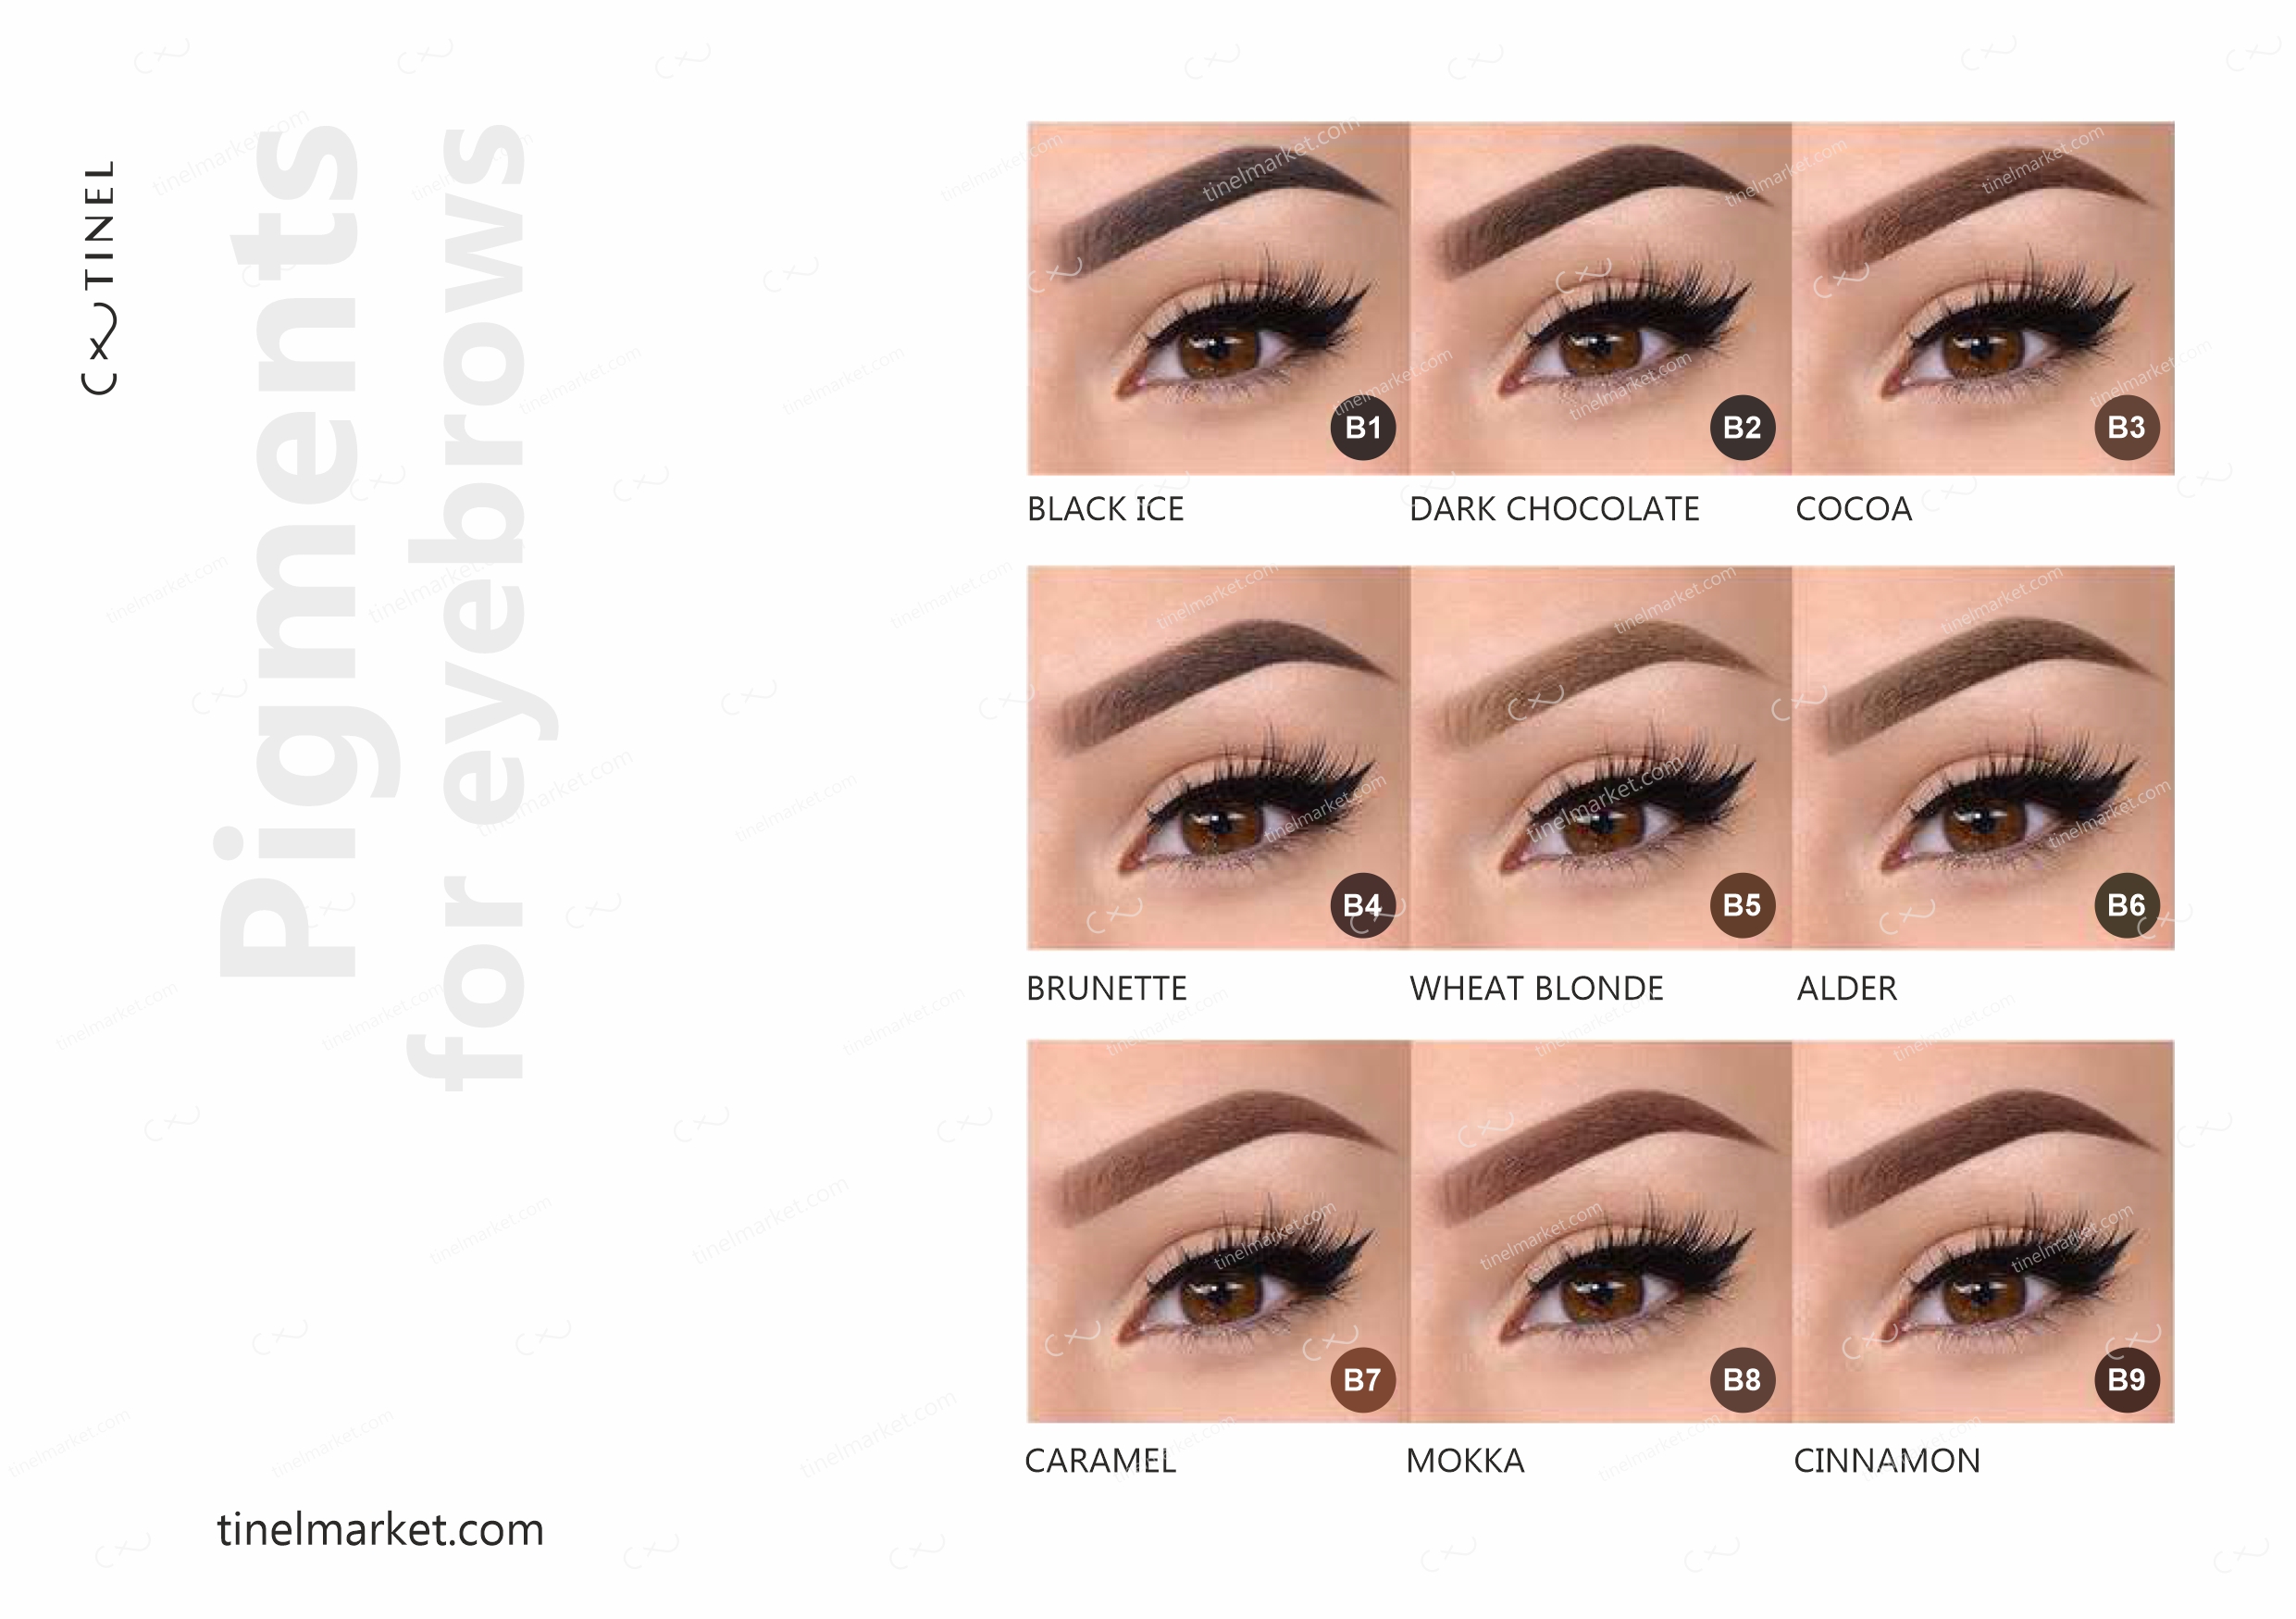 Tinel pigments for eyebrows